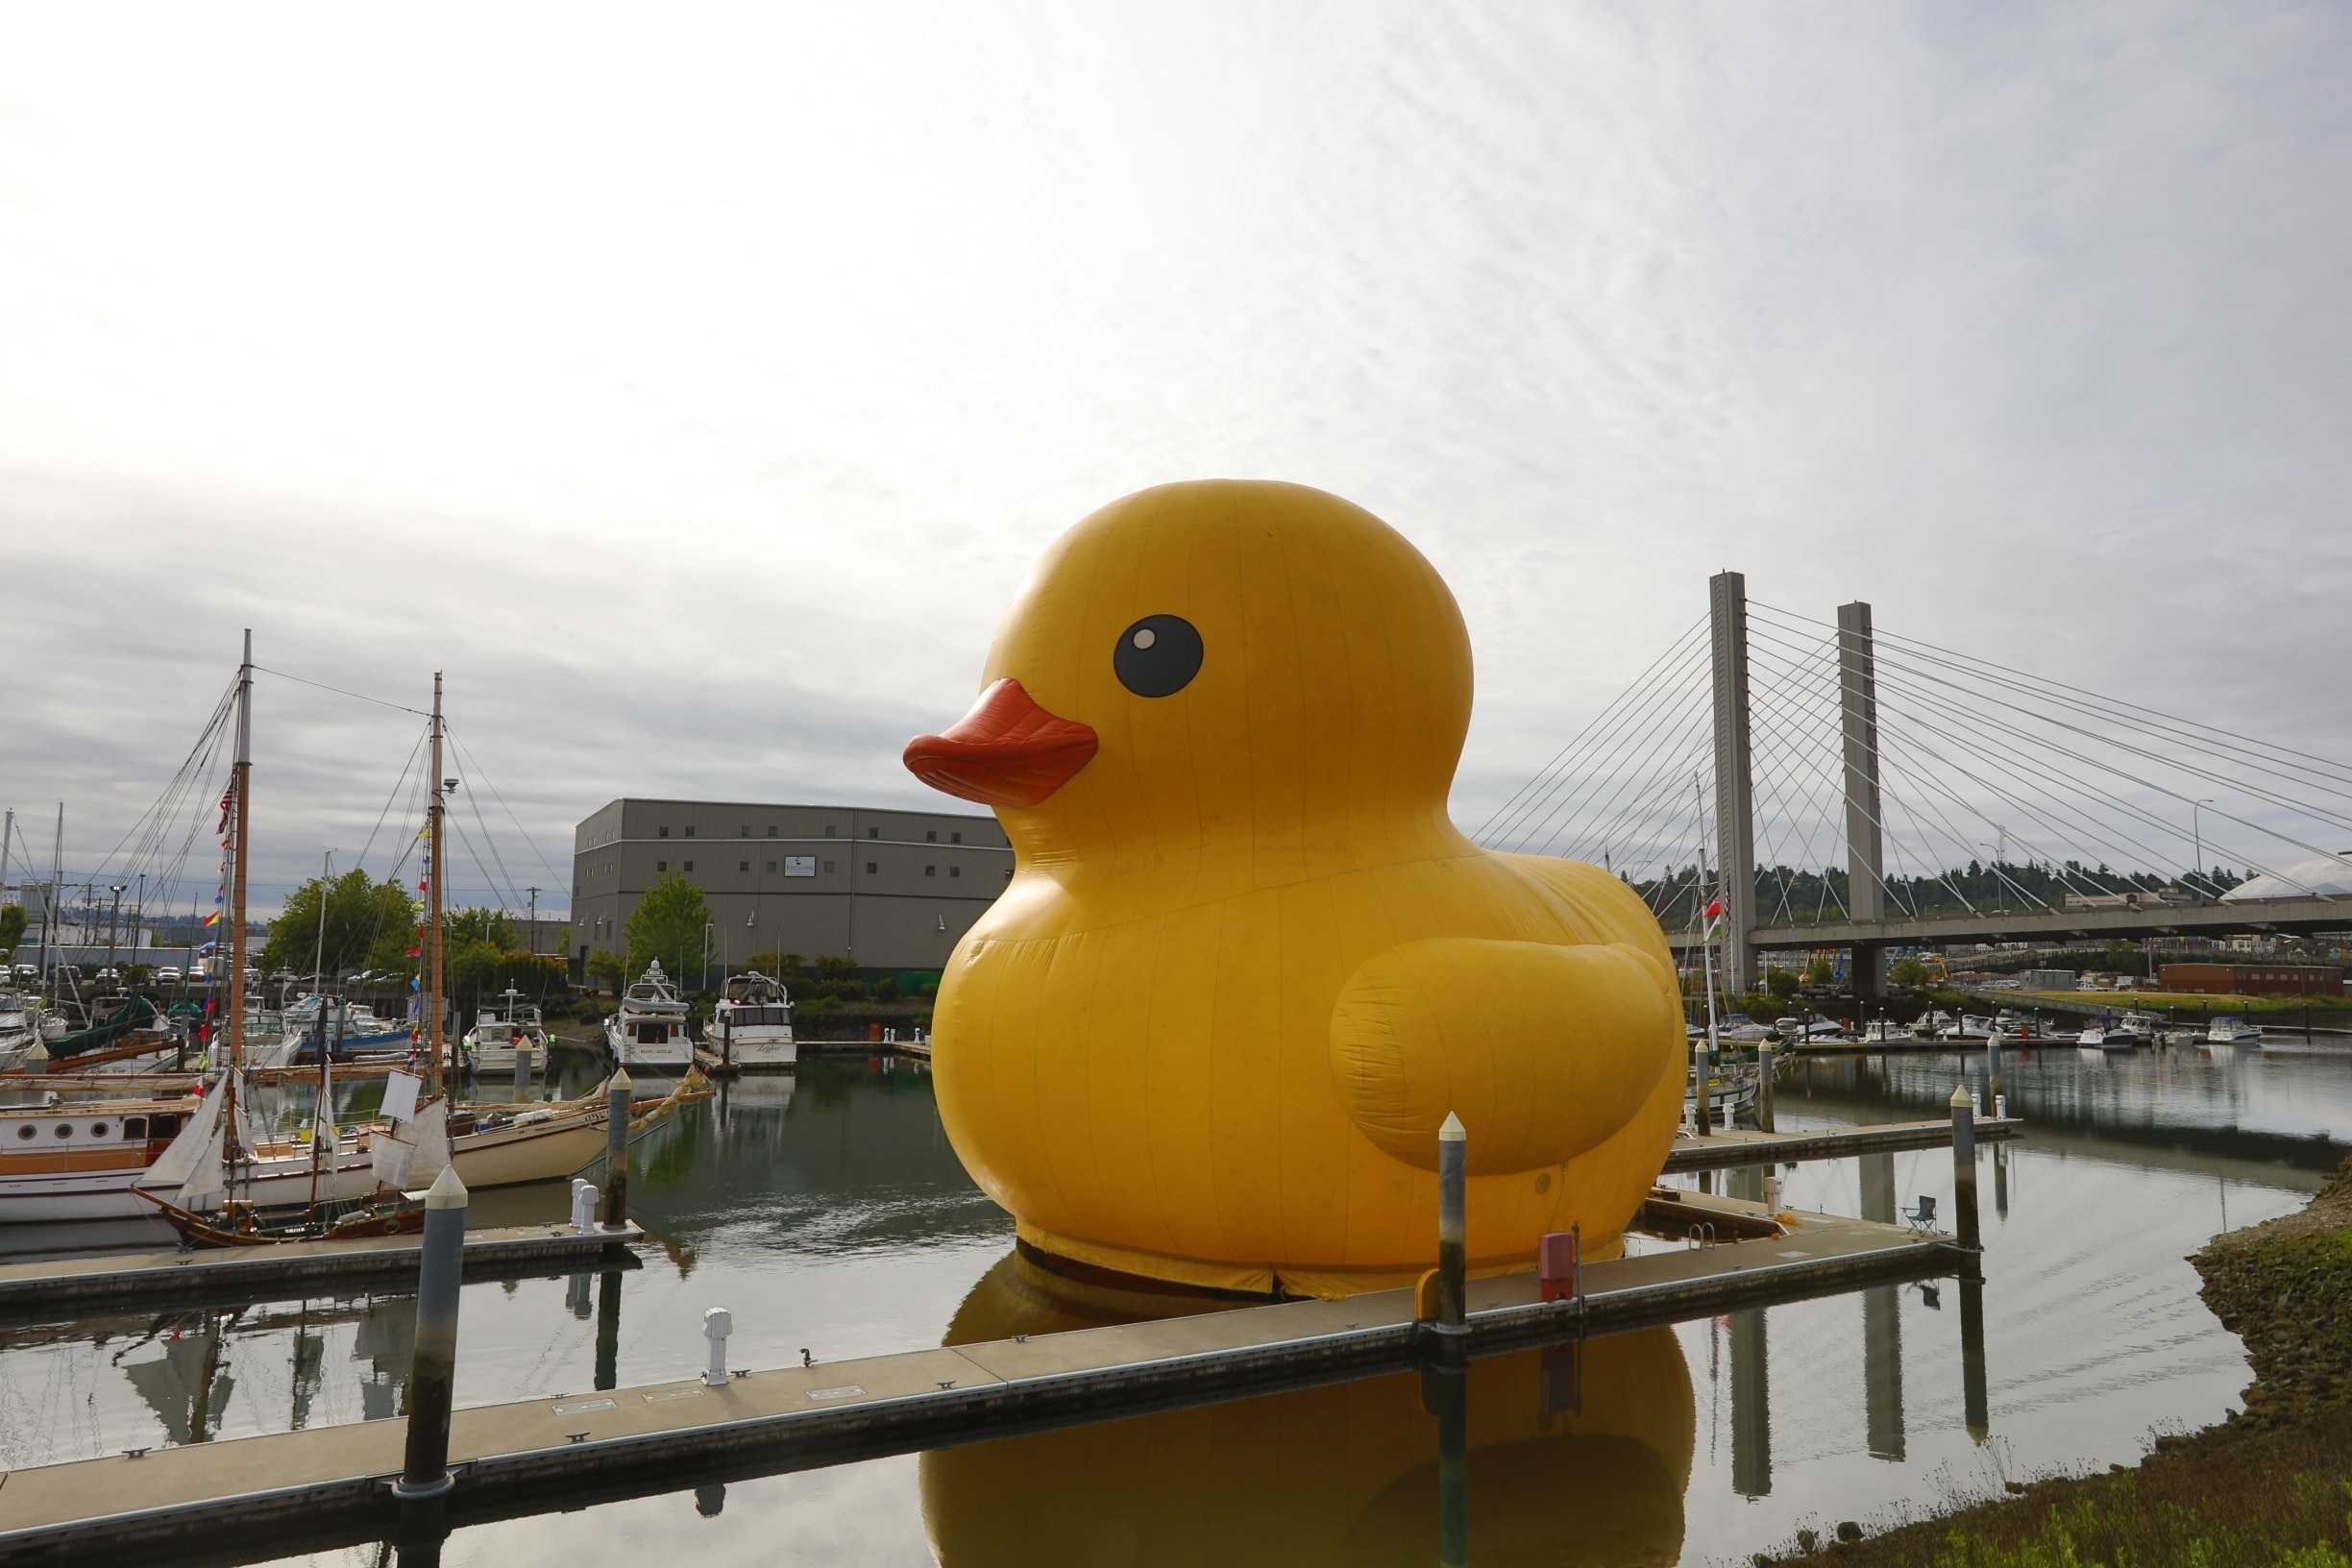 Giant rubber duckie for boat days